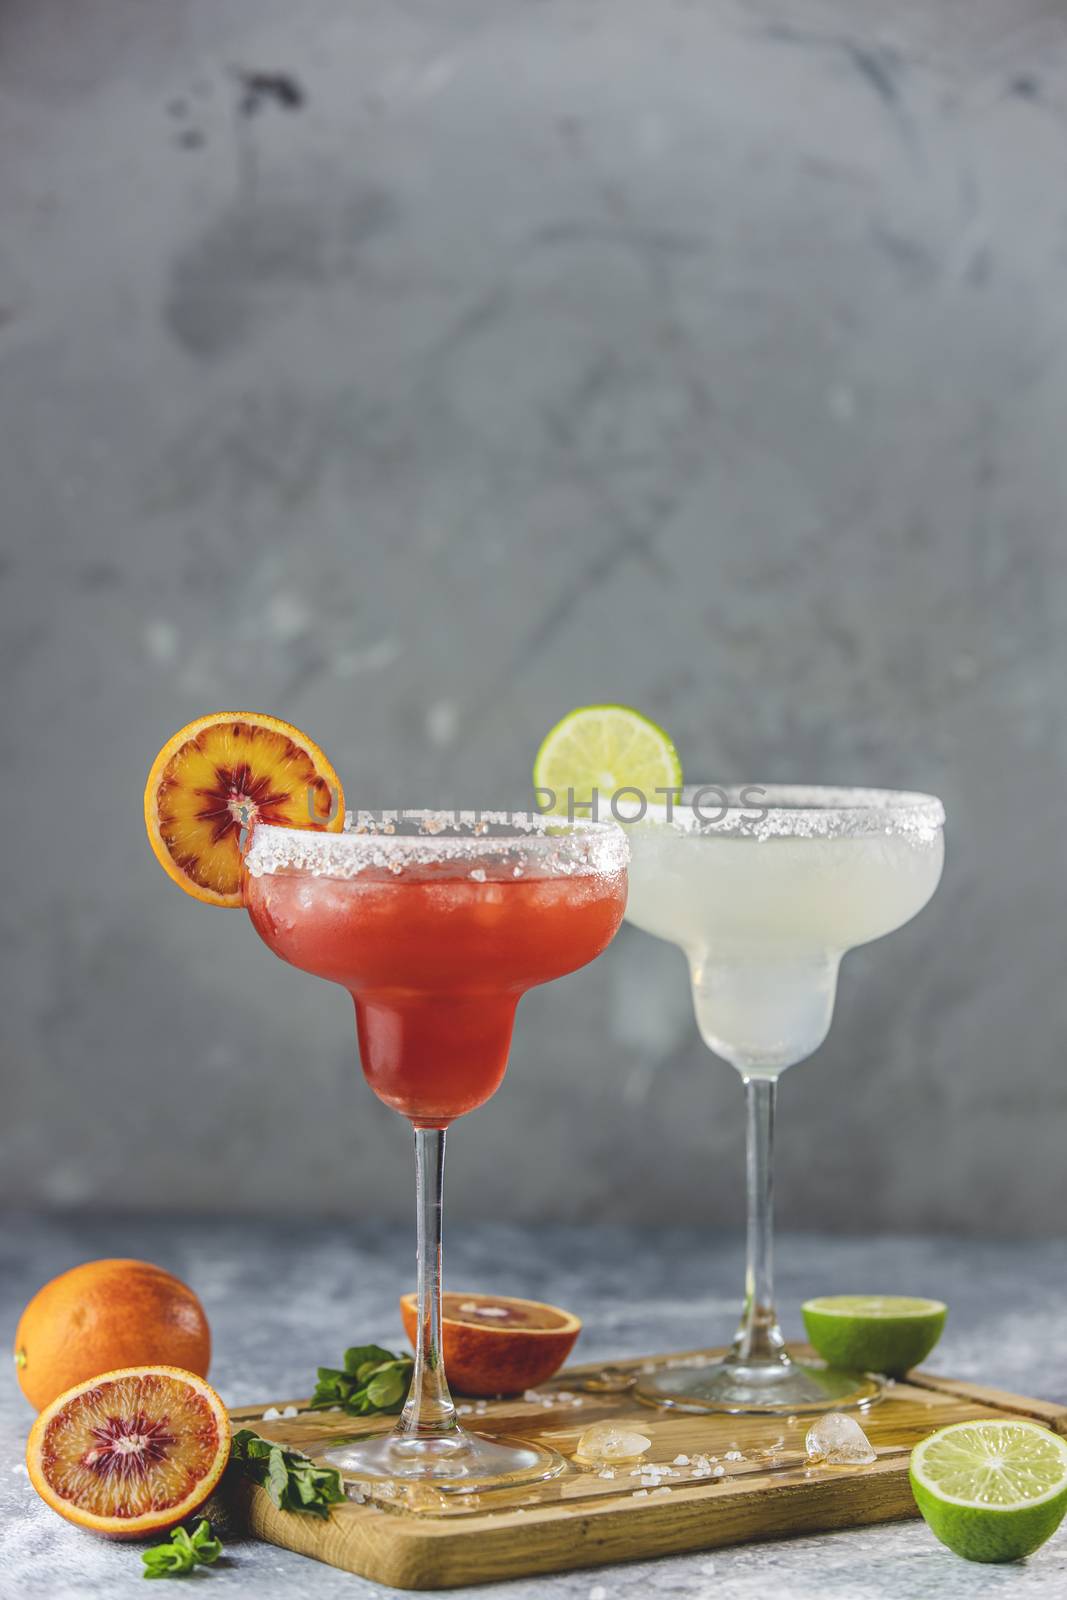 Frozen lime margarita and blood orange margarita cocktail mix in salt rimmed glasses garnished with slices of lime and orange. Focus on the citrus slice. Shallow depth of the field